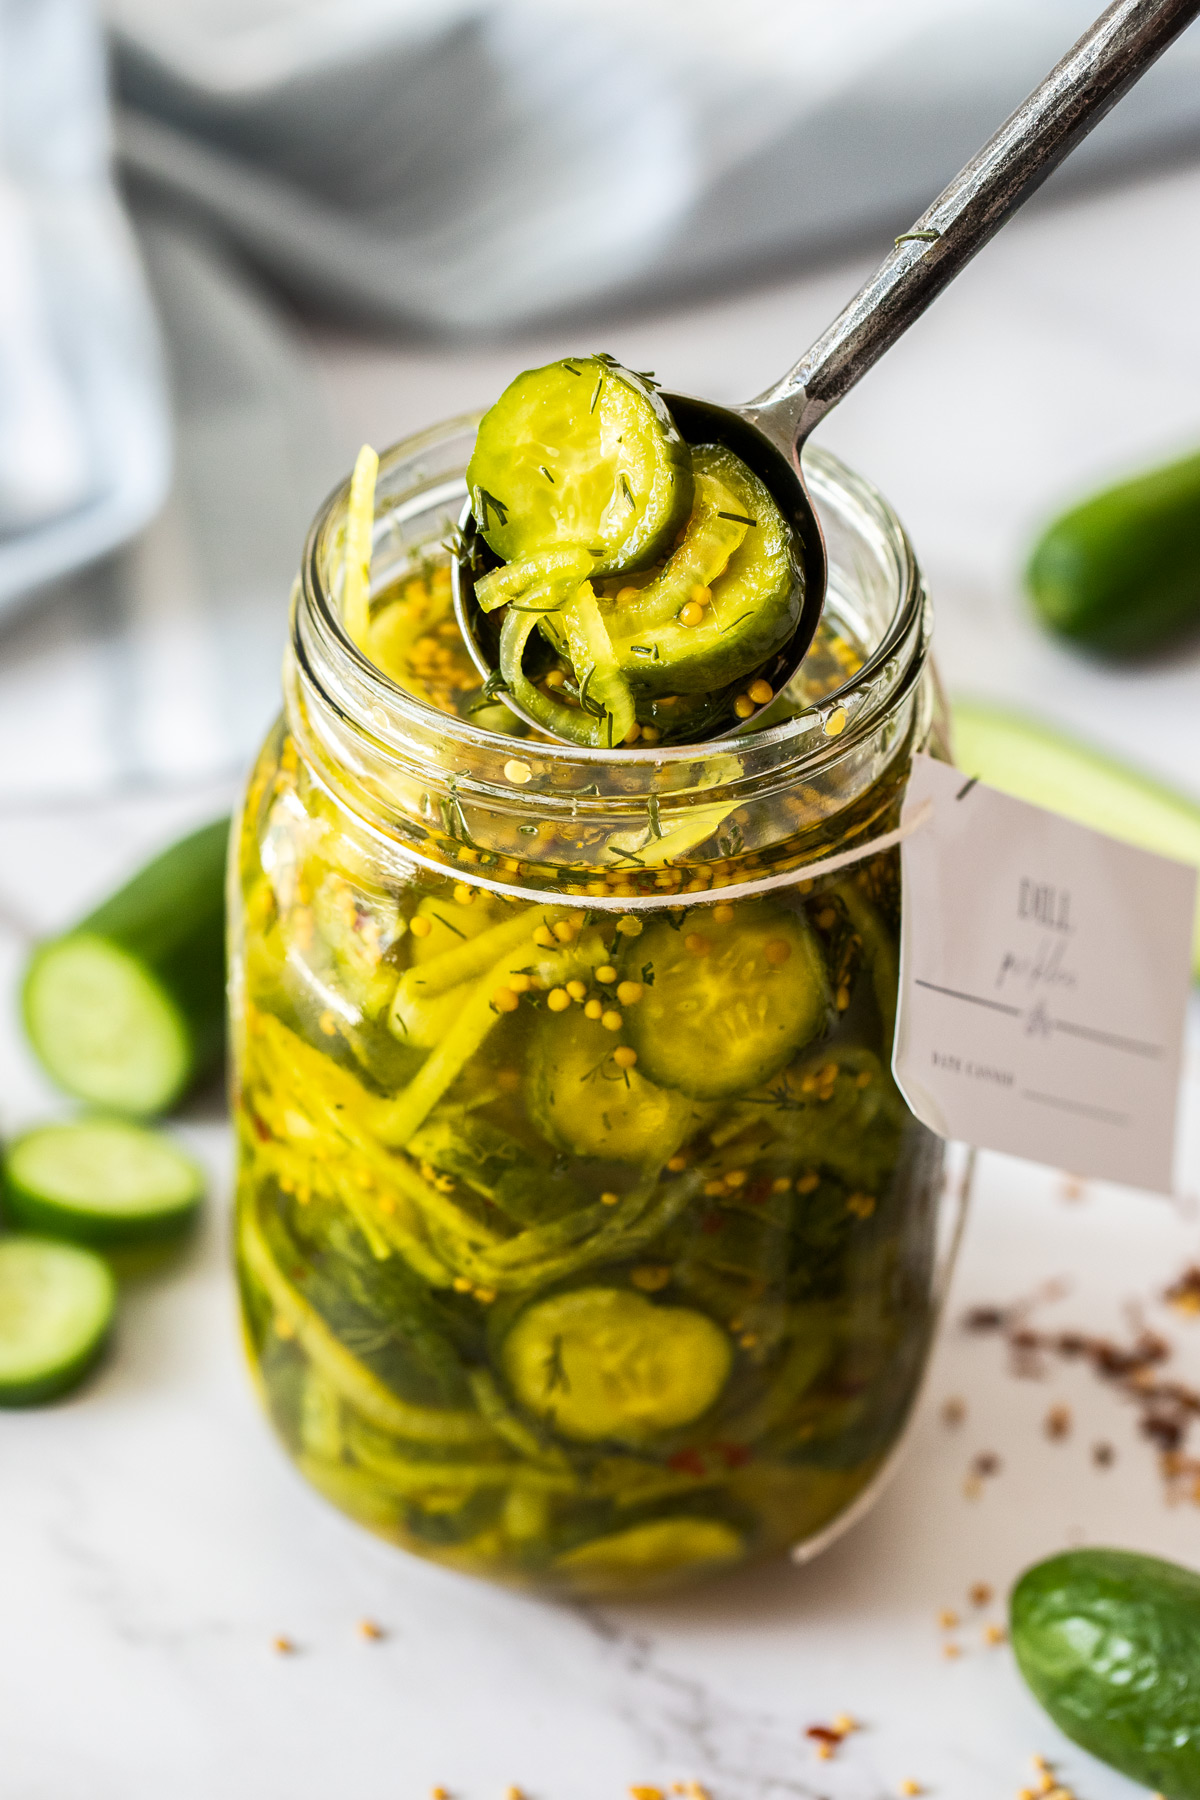 Jar of Cucumber Dill Pickles, with a spoon reaching in to lift some pickles out of the jar.